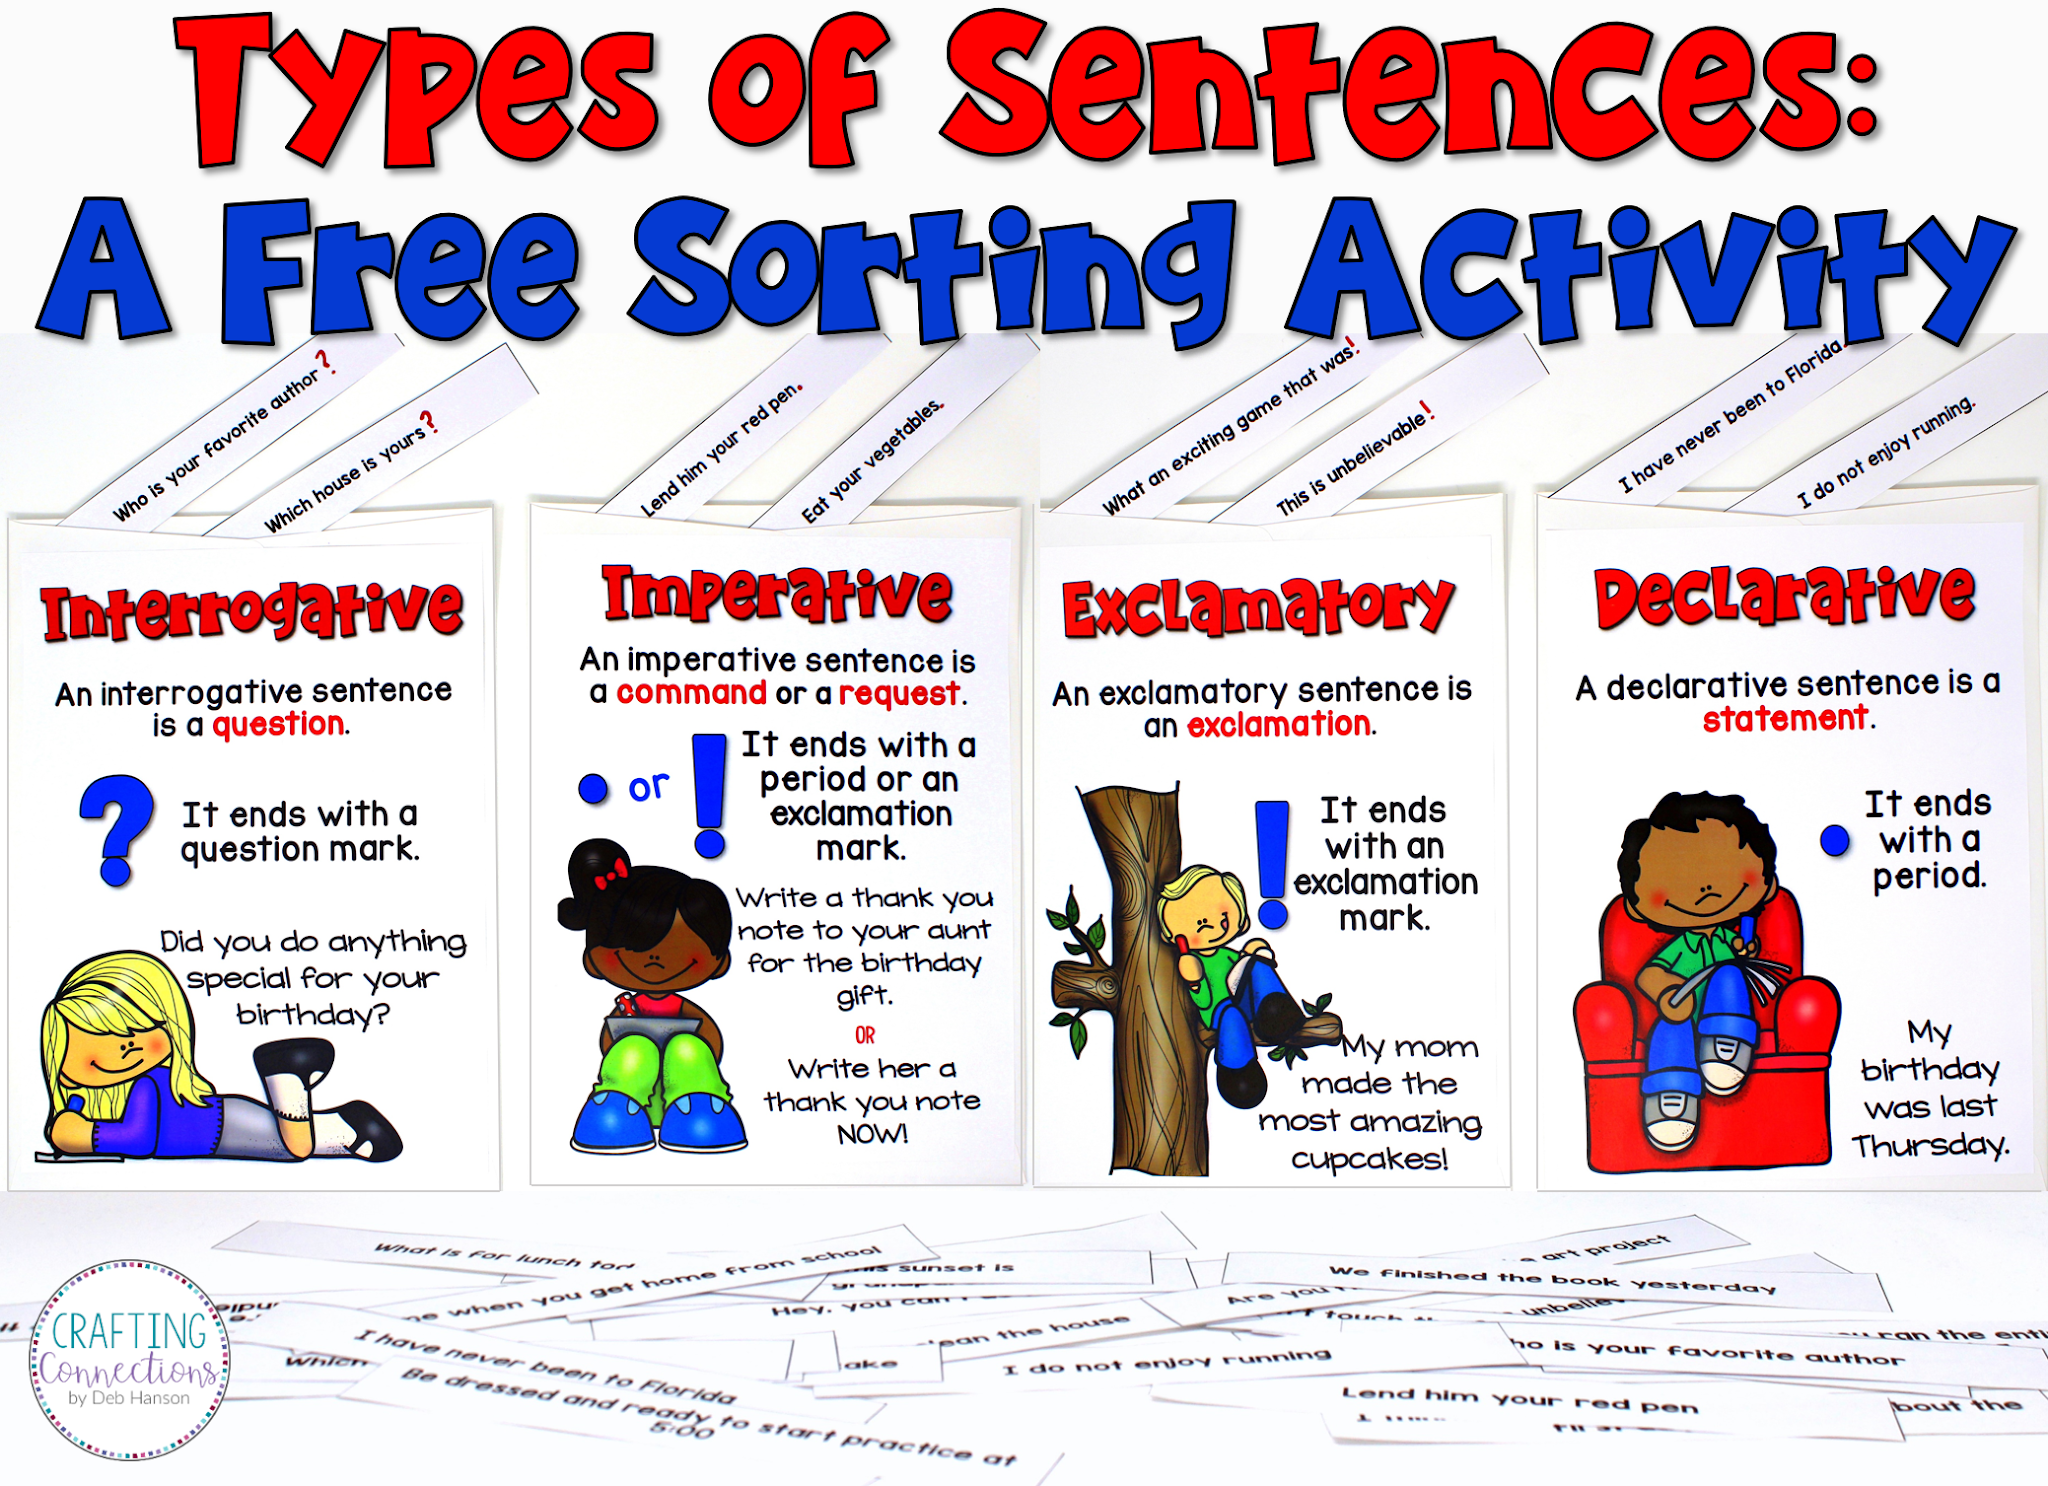 Types Of Sentences A Free Sorting Activity Crafting Connections